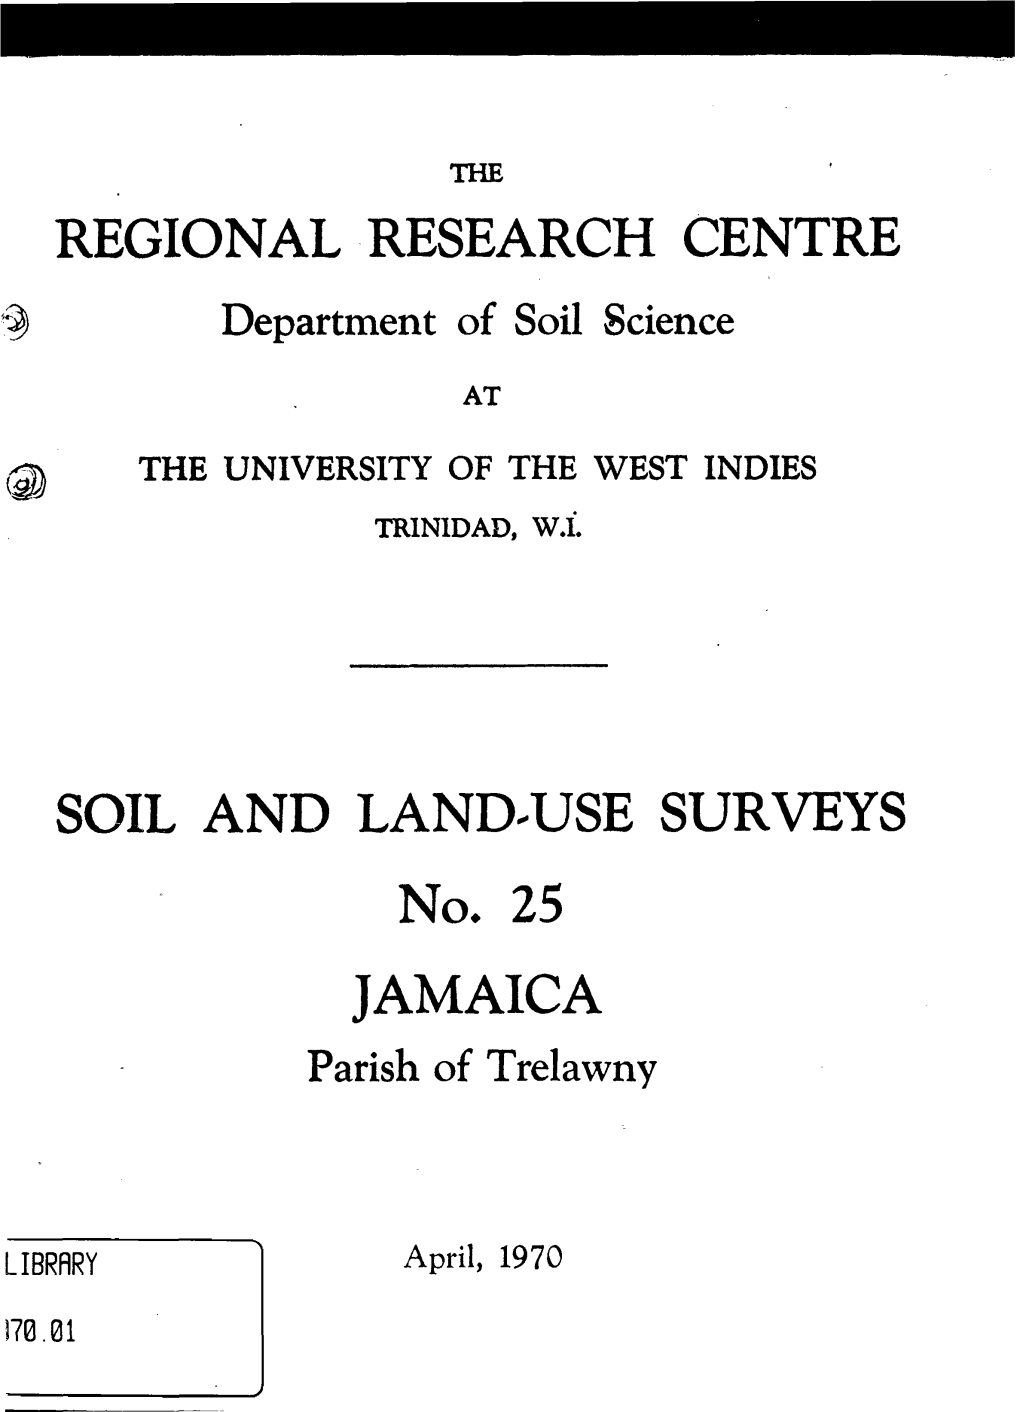 Regional Research Centre Soil and Land-Use Surveys